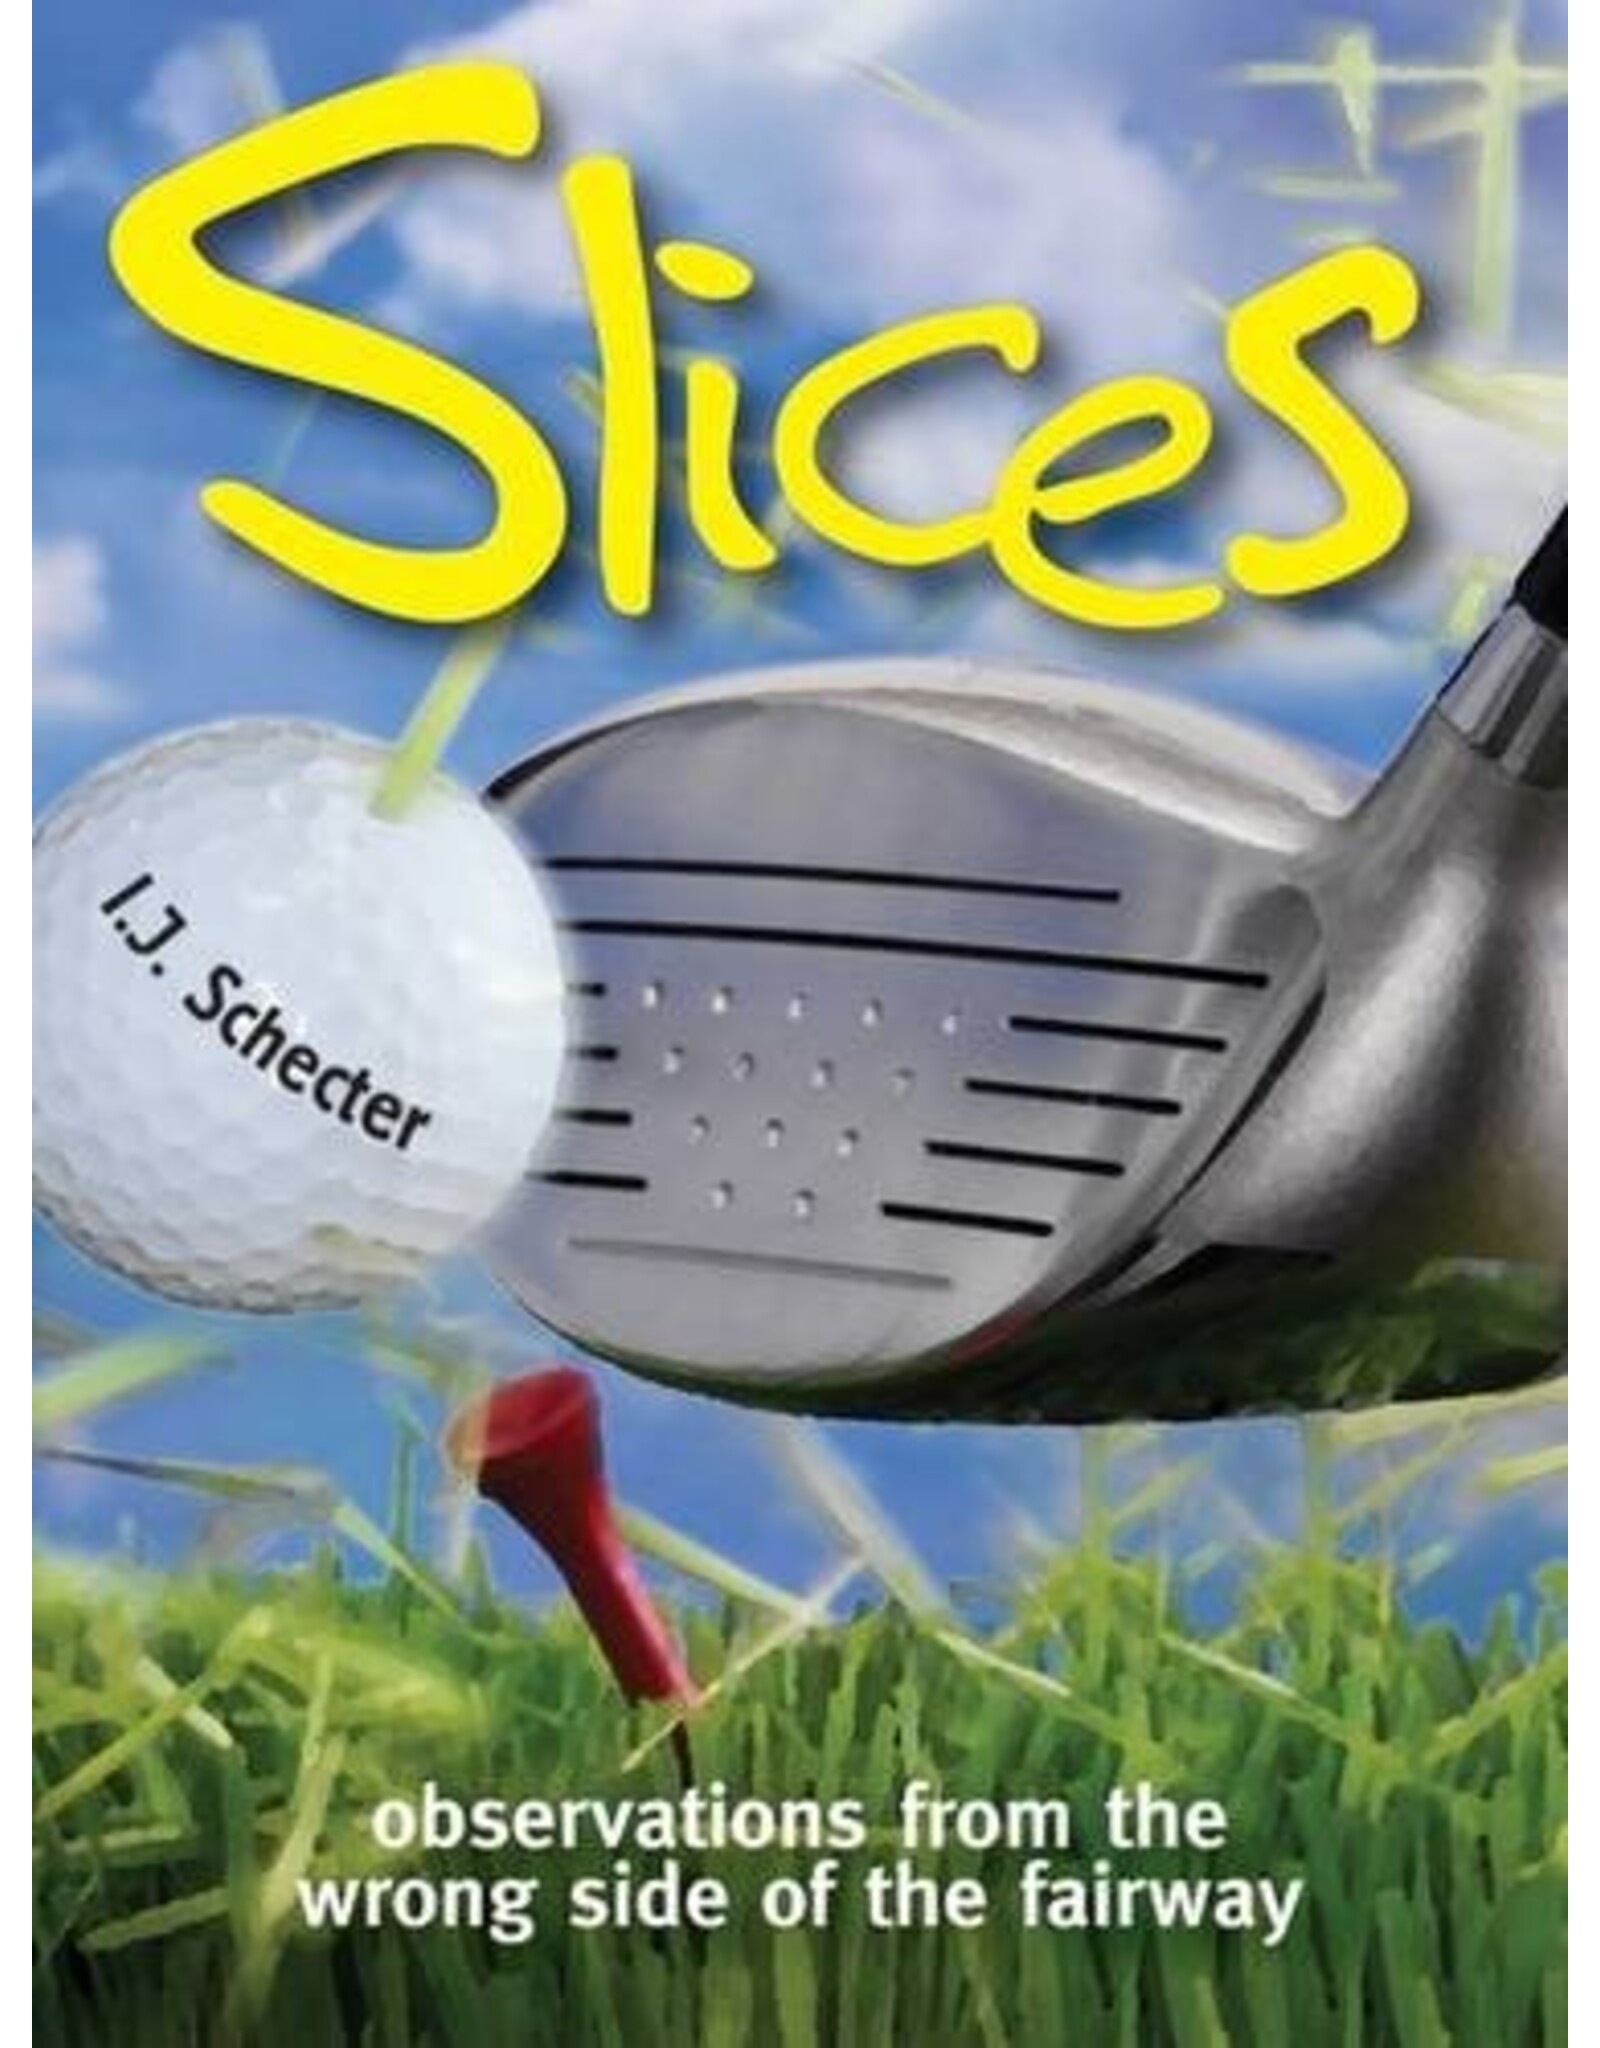 Slices: Observations from the Other Side of the Fairway